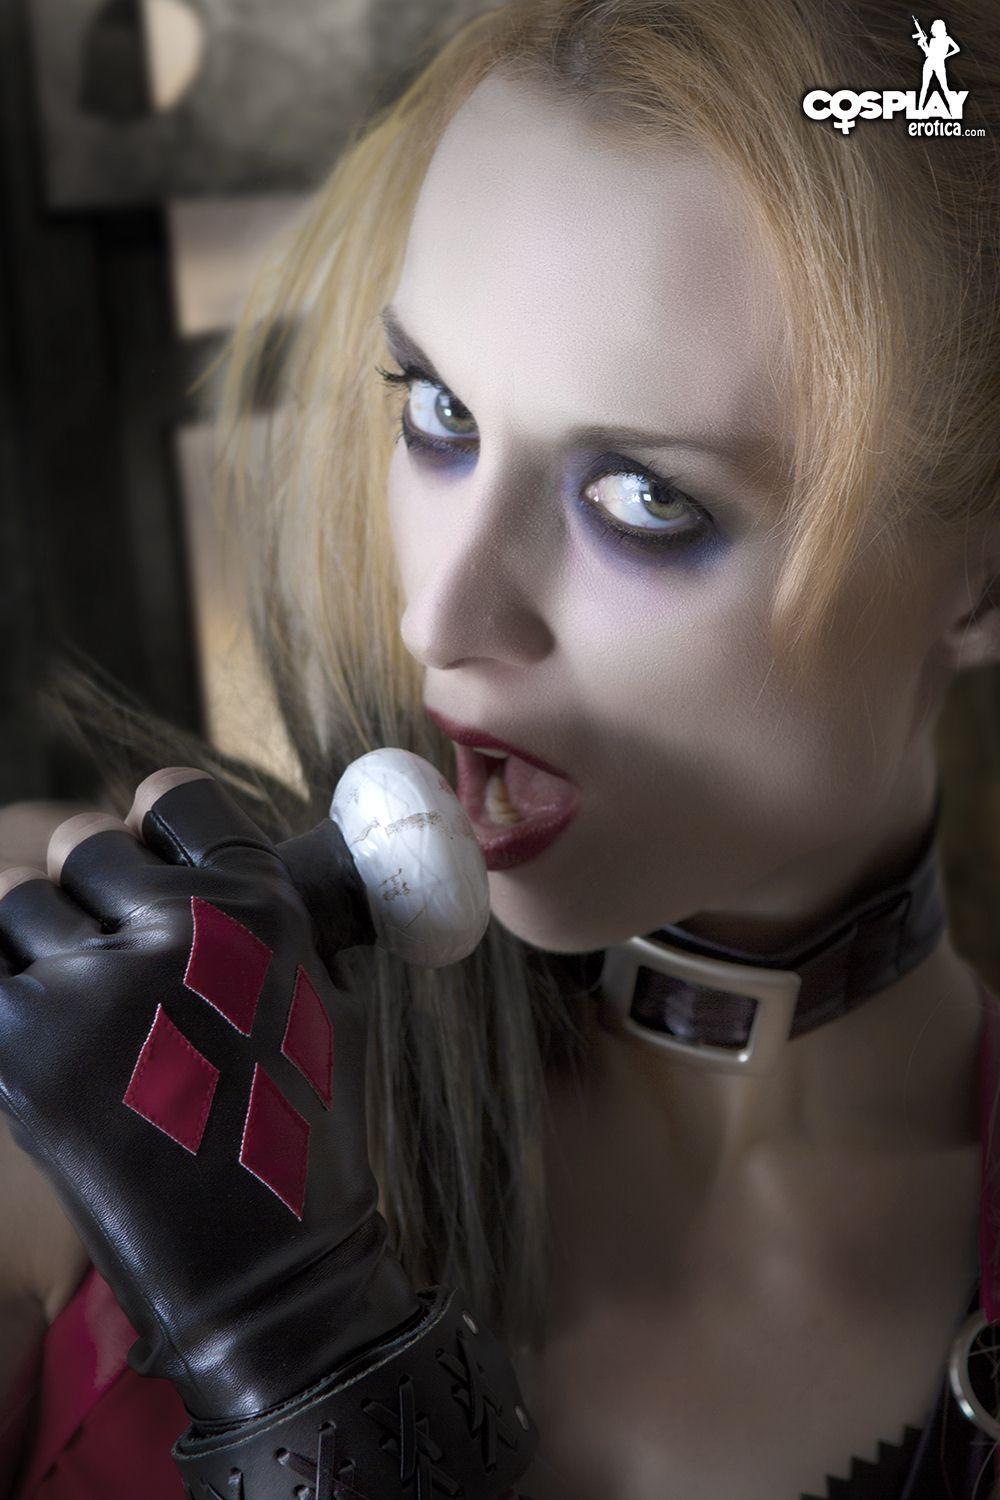 Pictures of sexy cosplayer Lana dressed as Harley Quinn from Arkham City #58814794